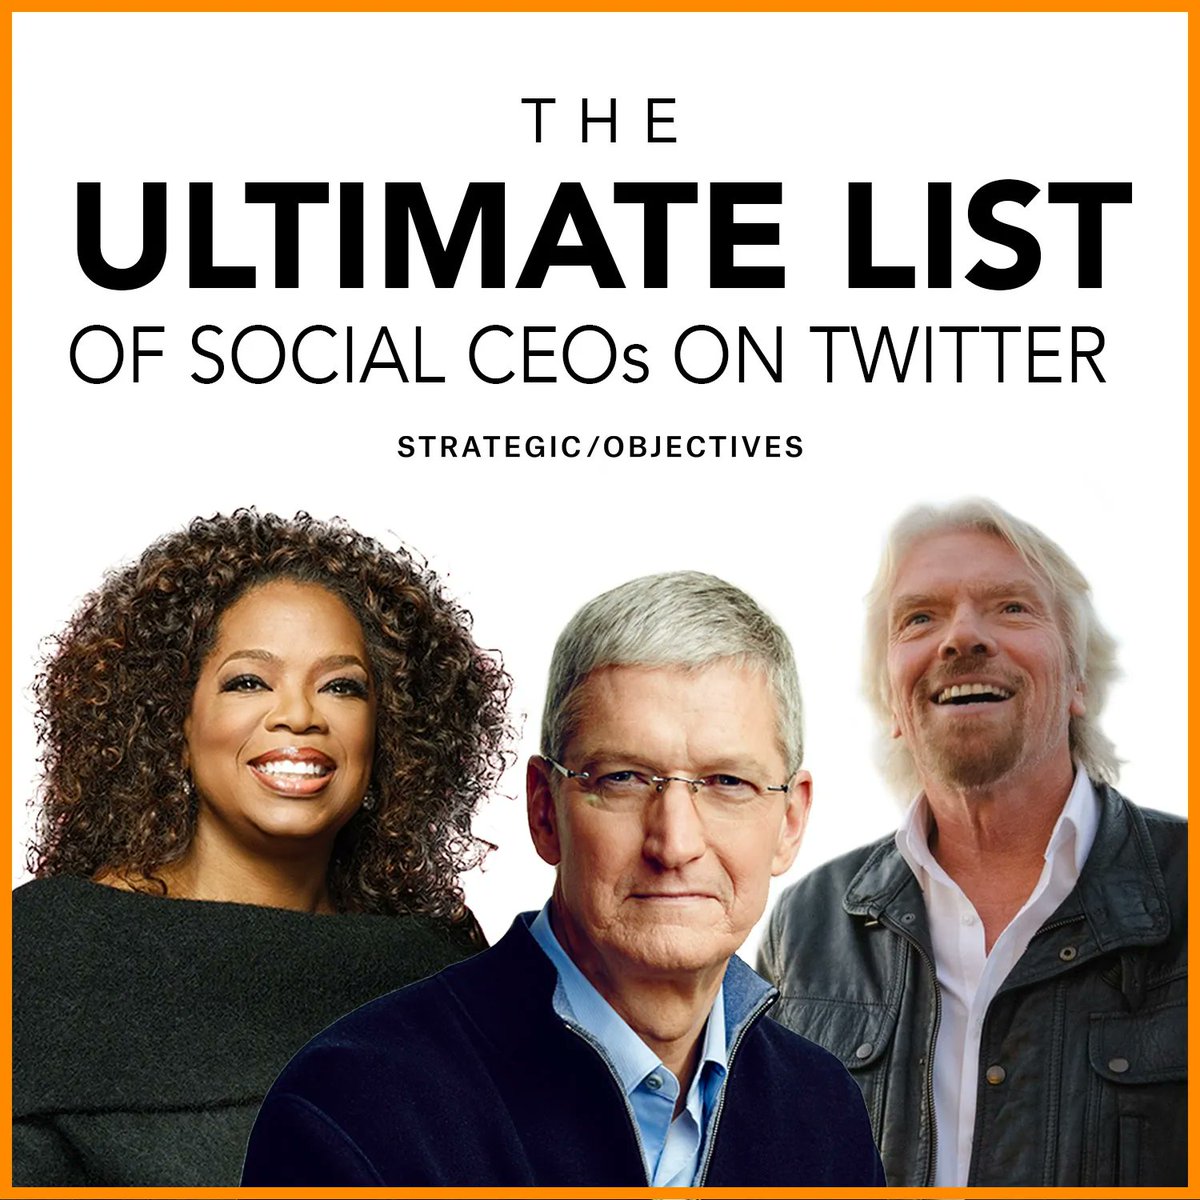 Where are savvy biz leaders found on Twitter? On @SO_pr’s Ultimate List of 850+ Social CEOs of course, and now we welcome @tnight ! Please read on for more. #ceos #leader #SOcialceo buff.ly/3JQmGzq